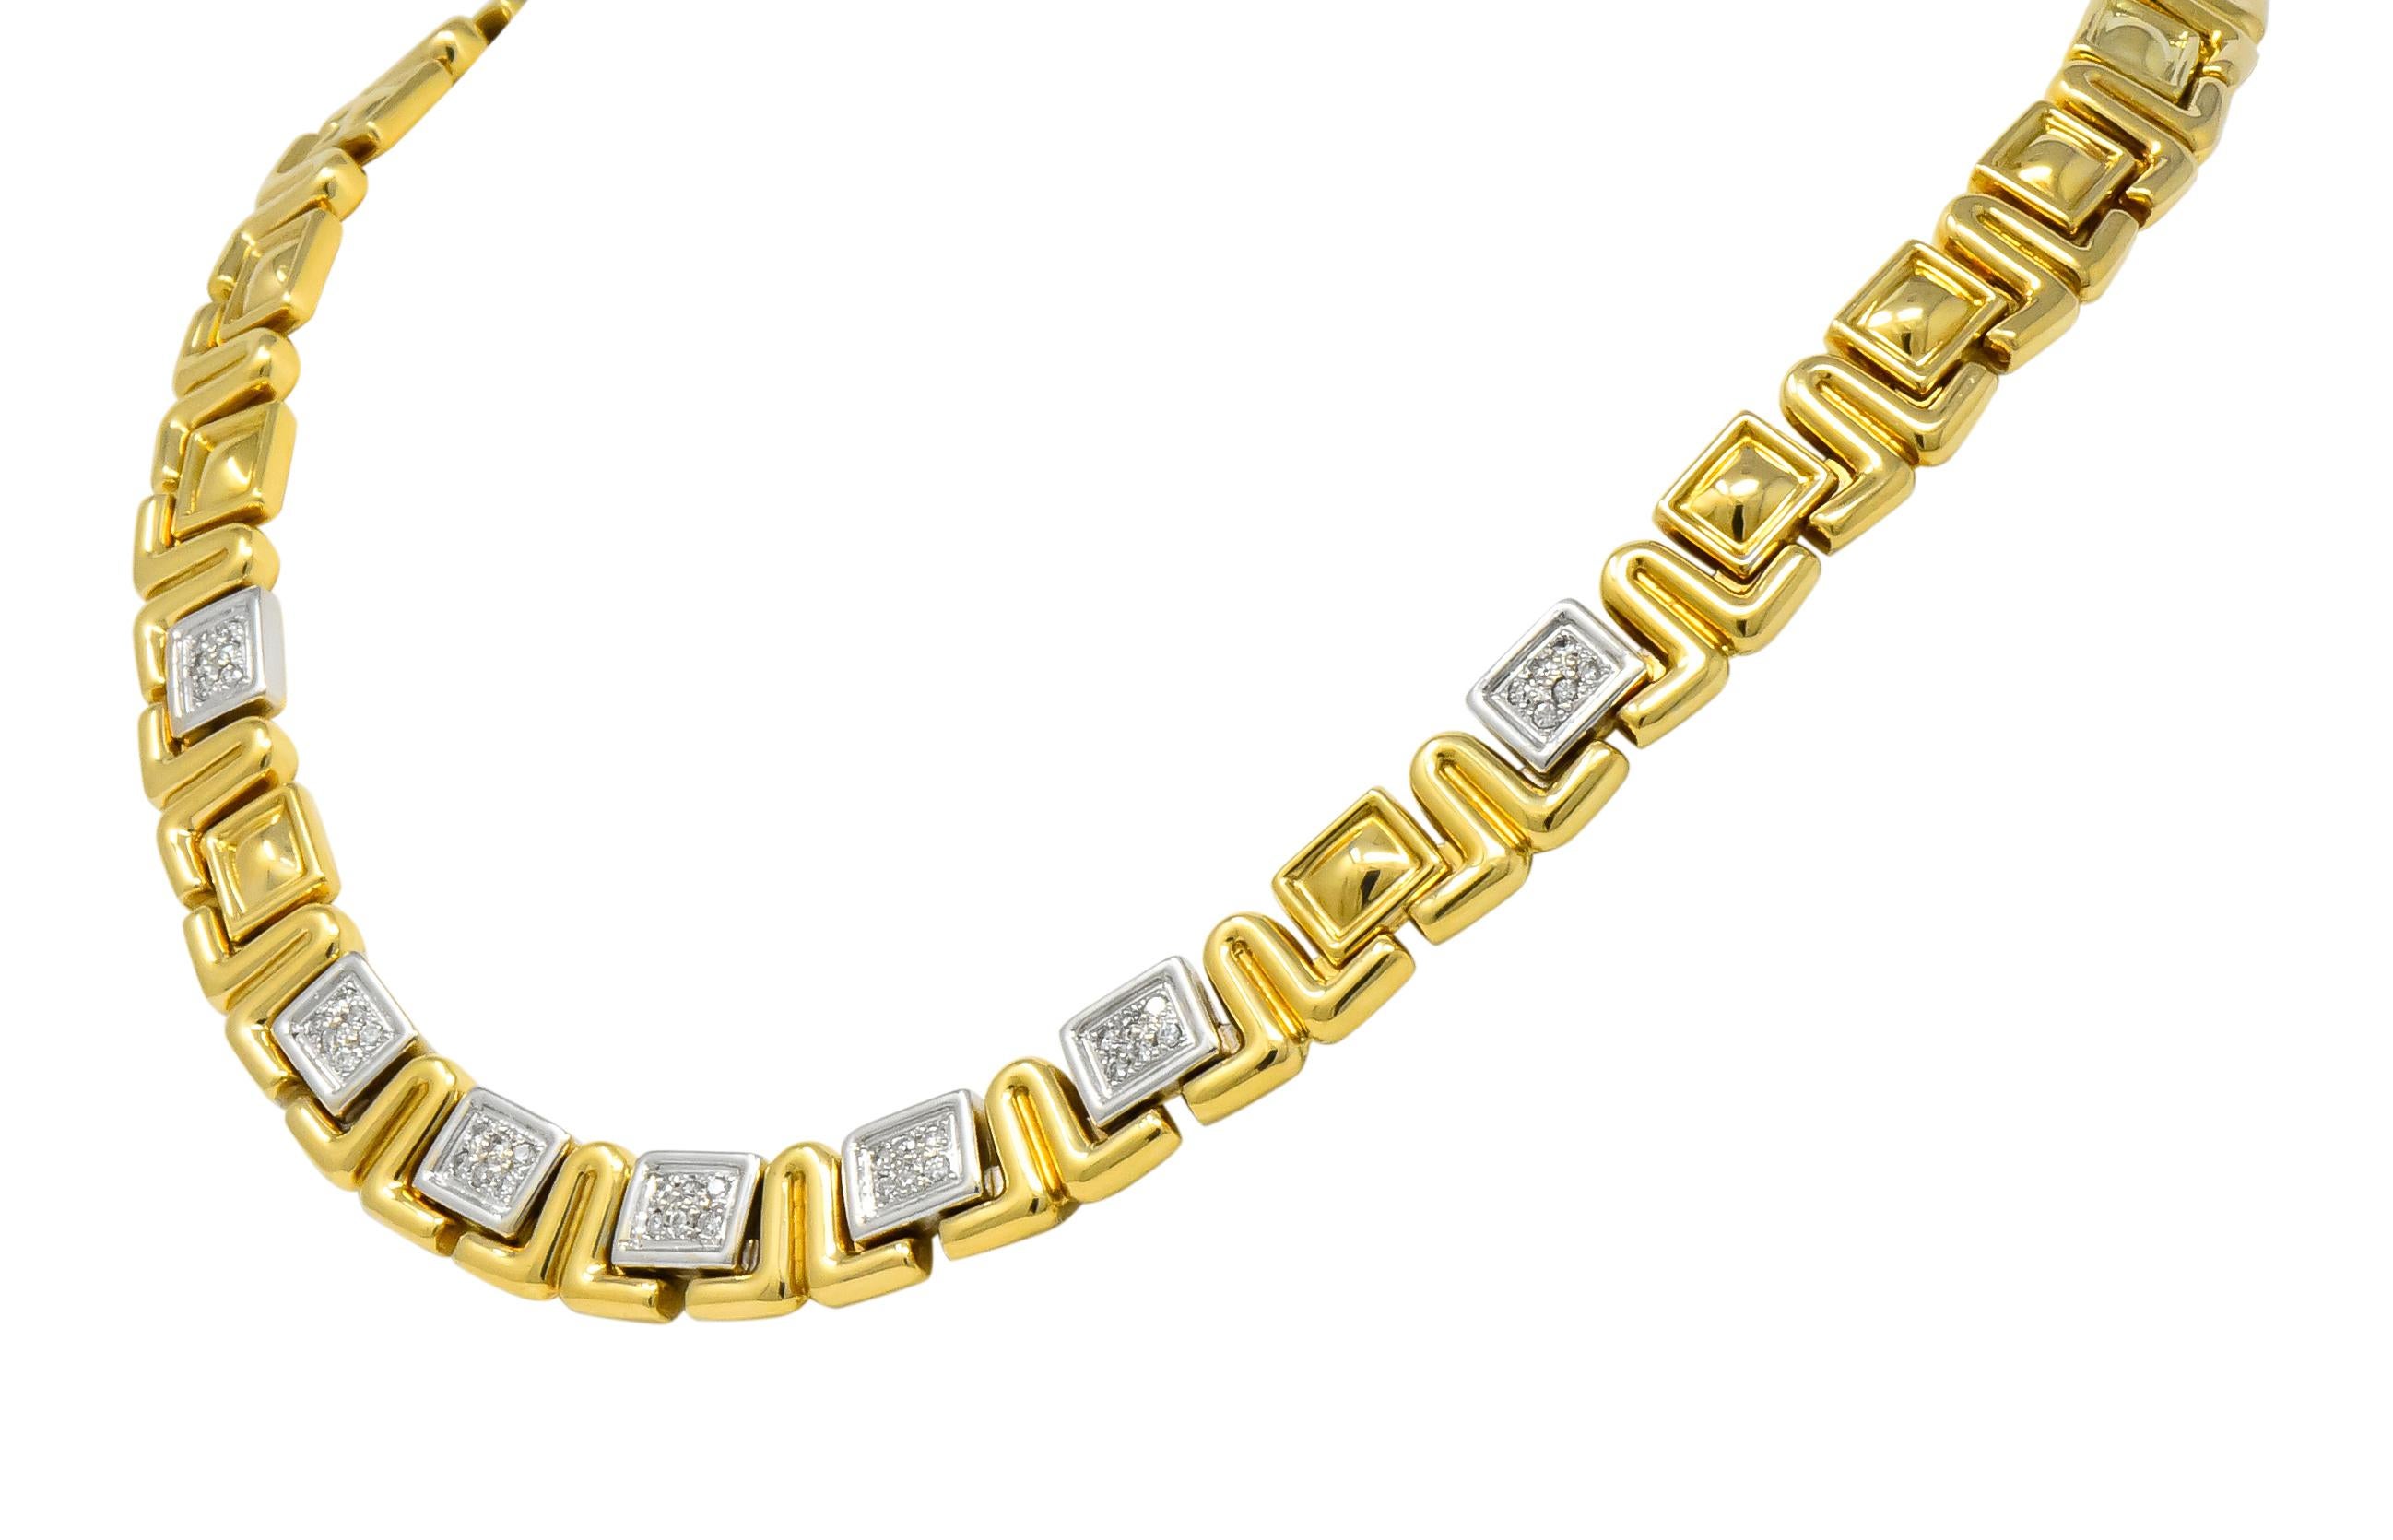 Collar style necklace comprised of puffed, polished gold, geometric links; each centering rectangular forms

Front facing rectangular links are comprised of white gold and are pavé set with round brilliant cut diamonds weighing approximately 0.85